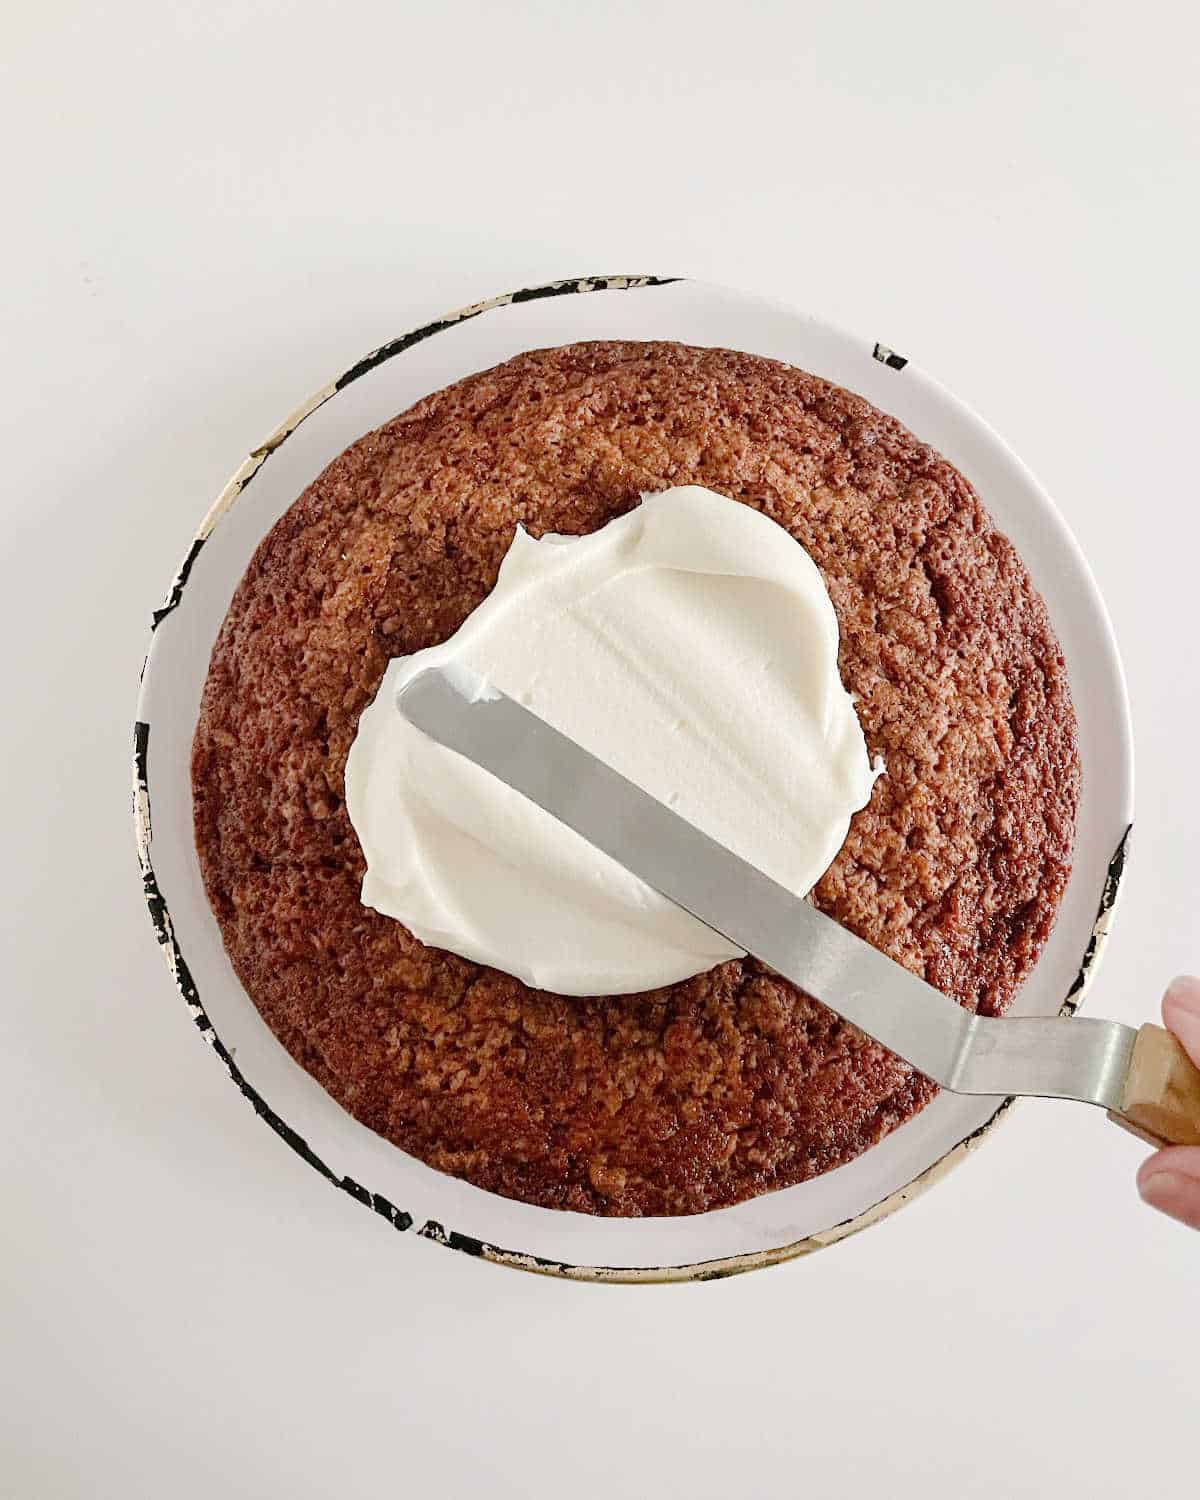 Filling a carrot cake layer with cream cheese frosting and an offset spatula. White surface.